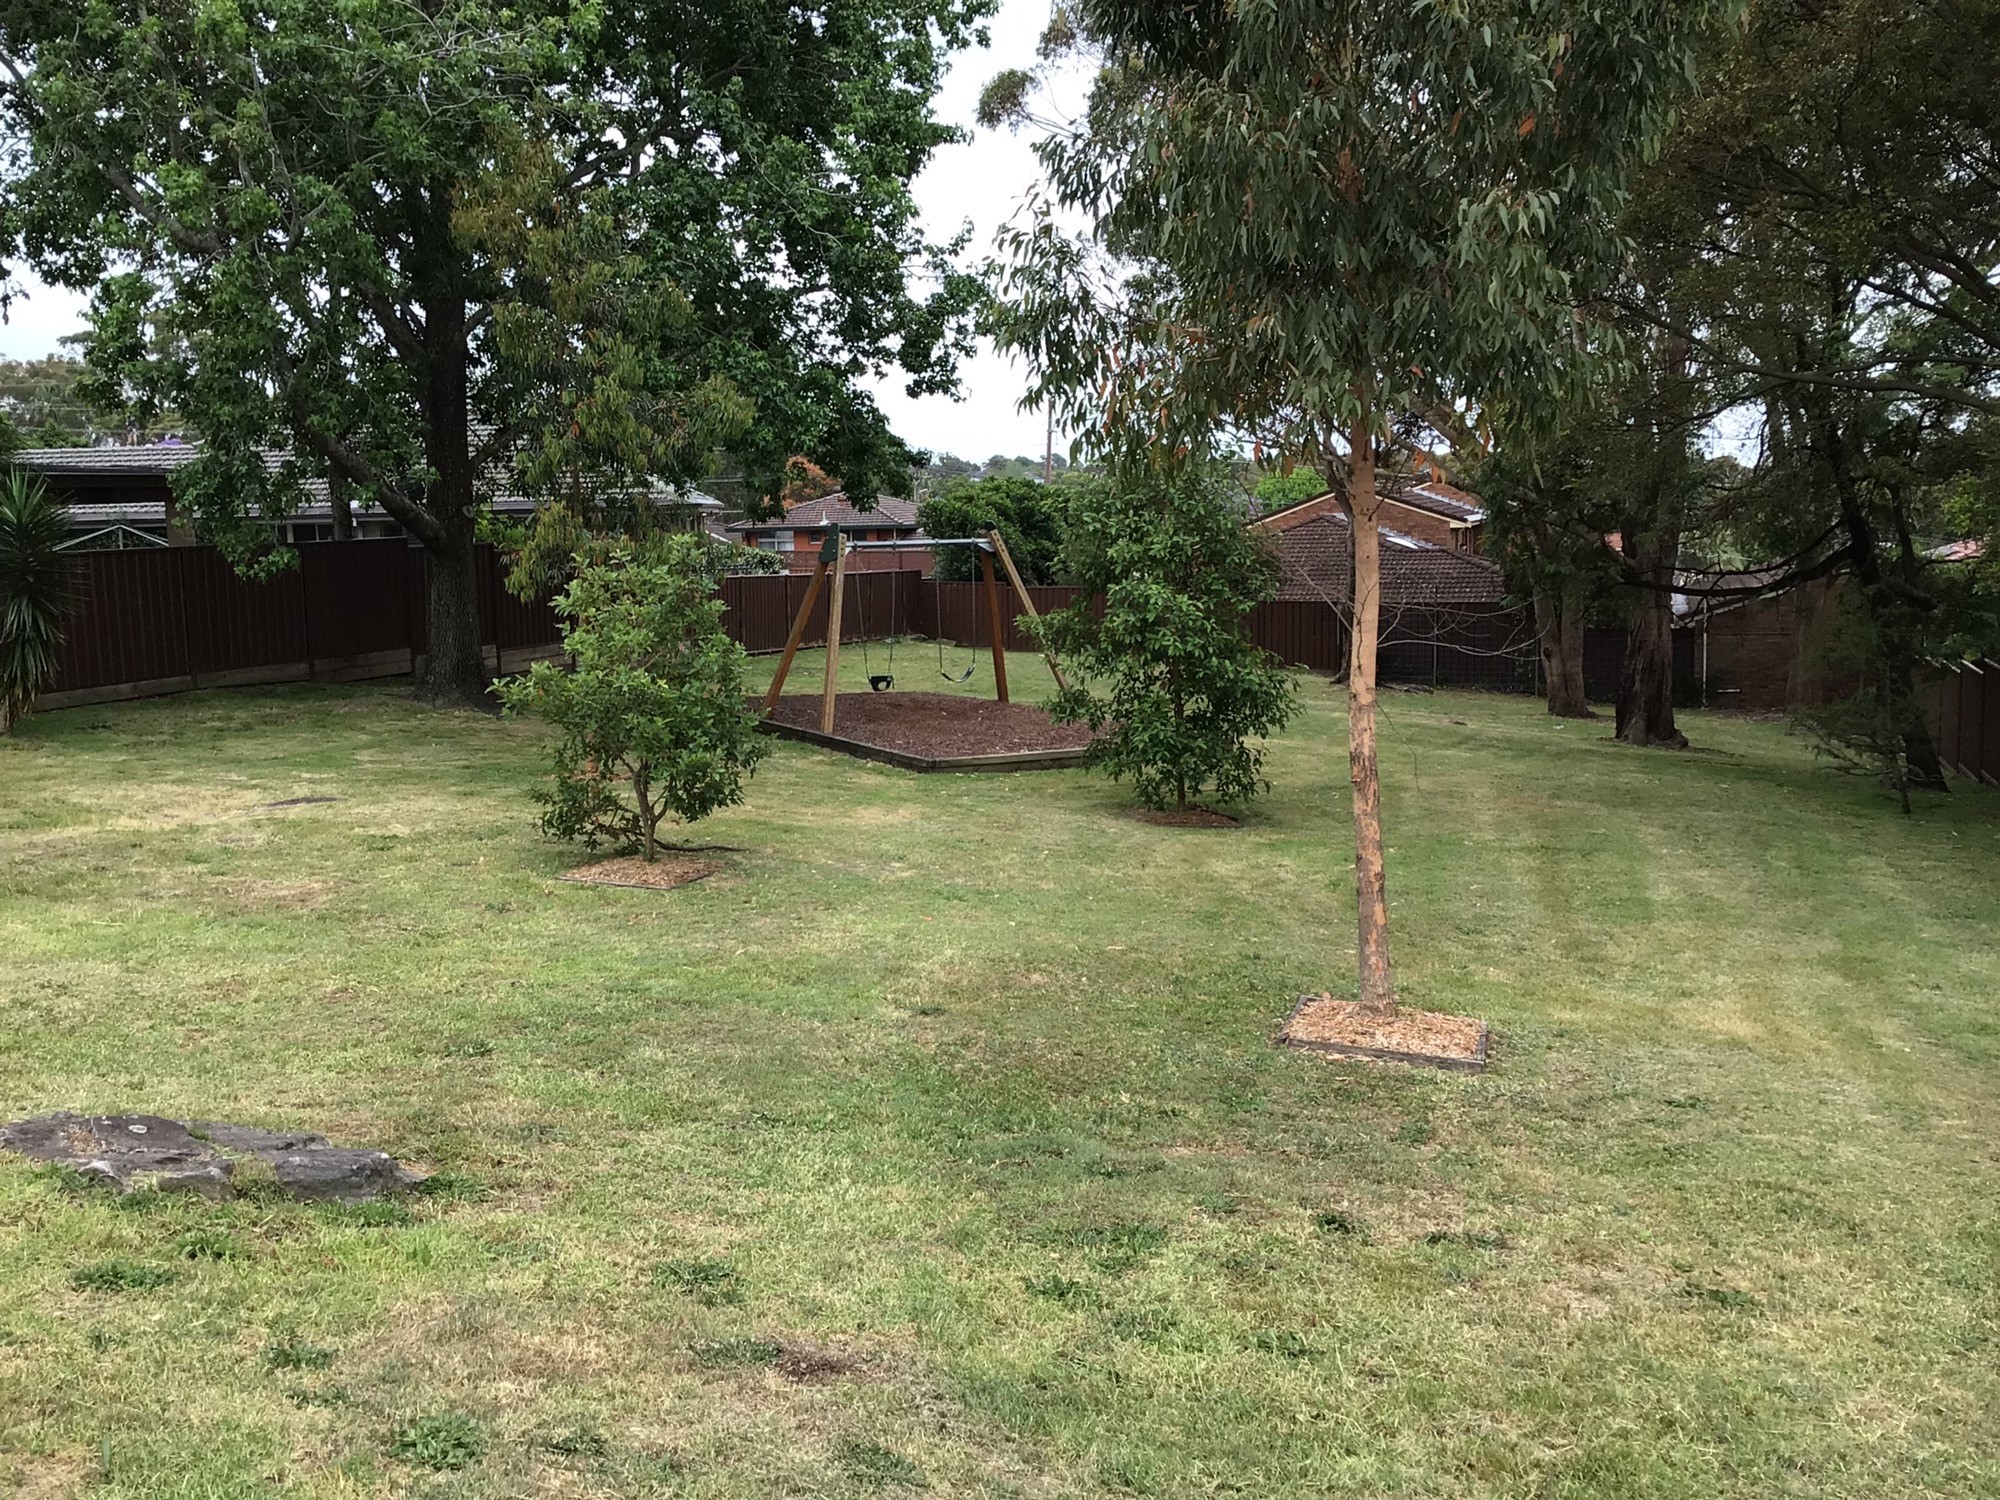 Park with swing set and trees